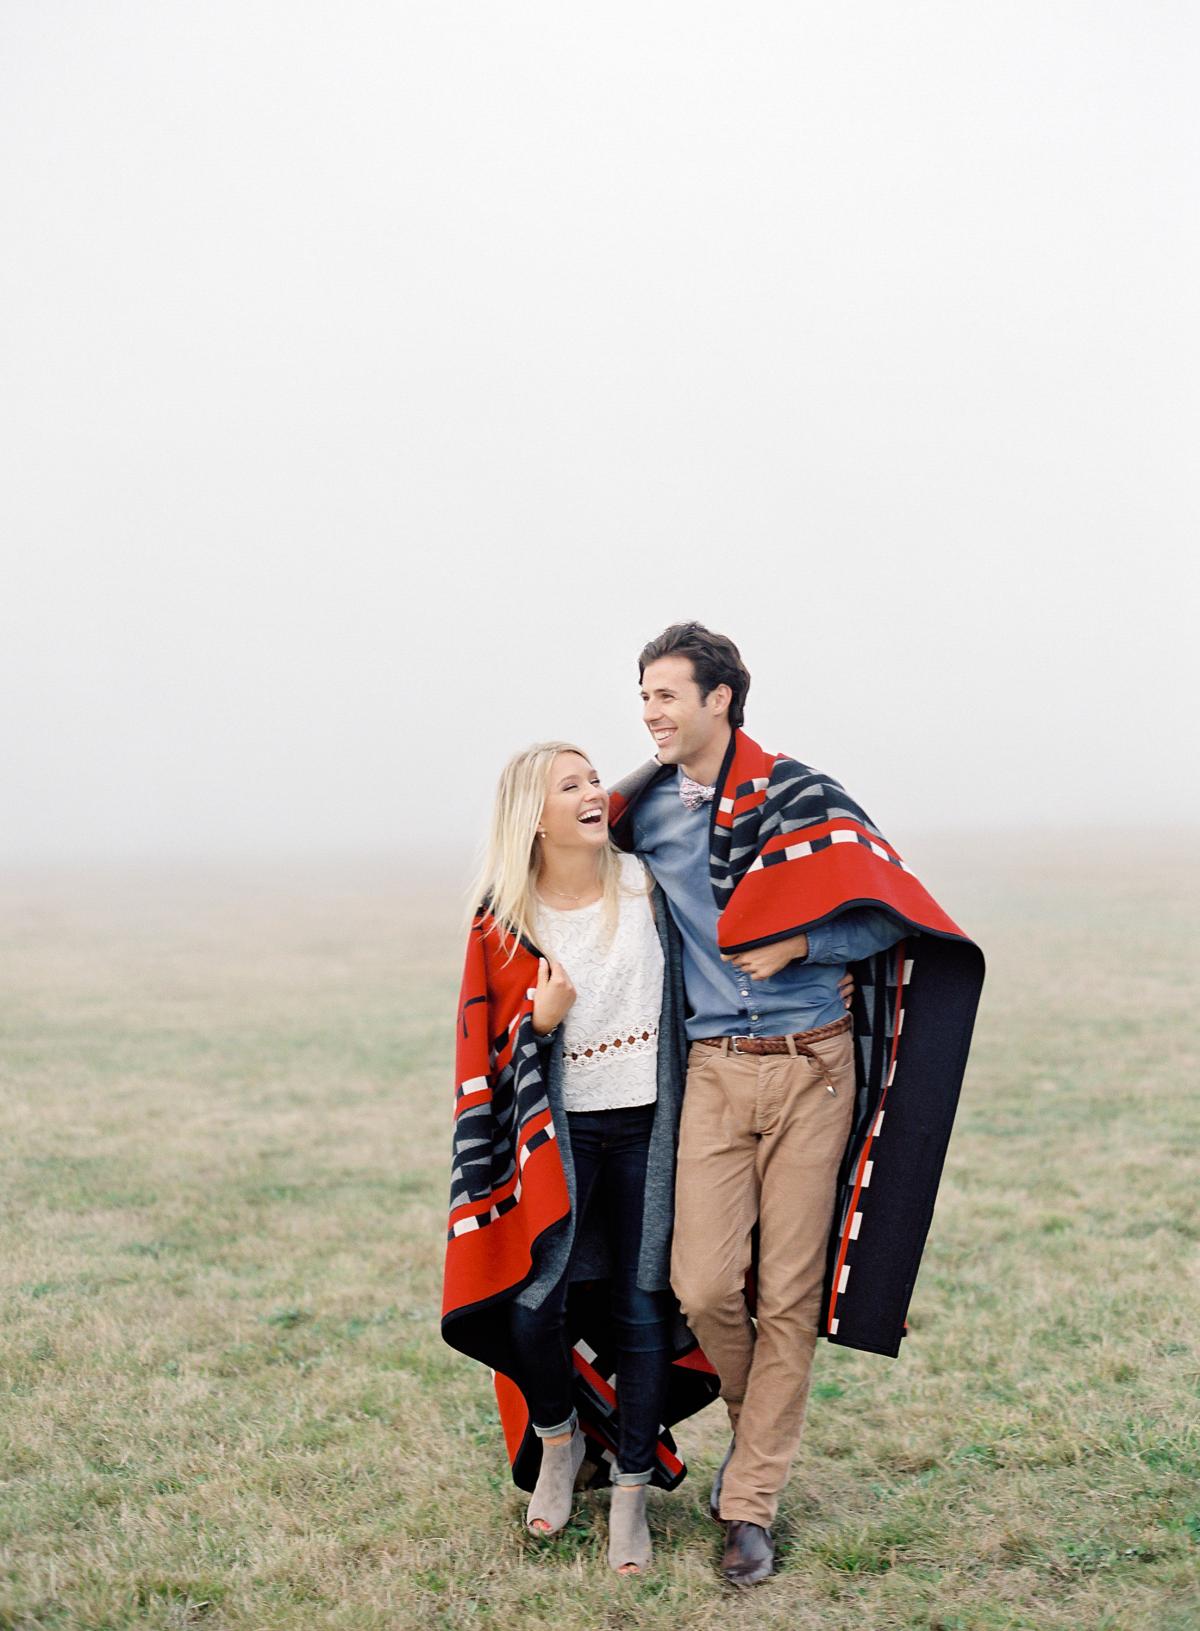 Foggy seattle engagement session by omalley photographers 0010